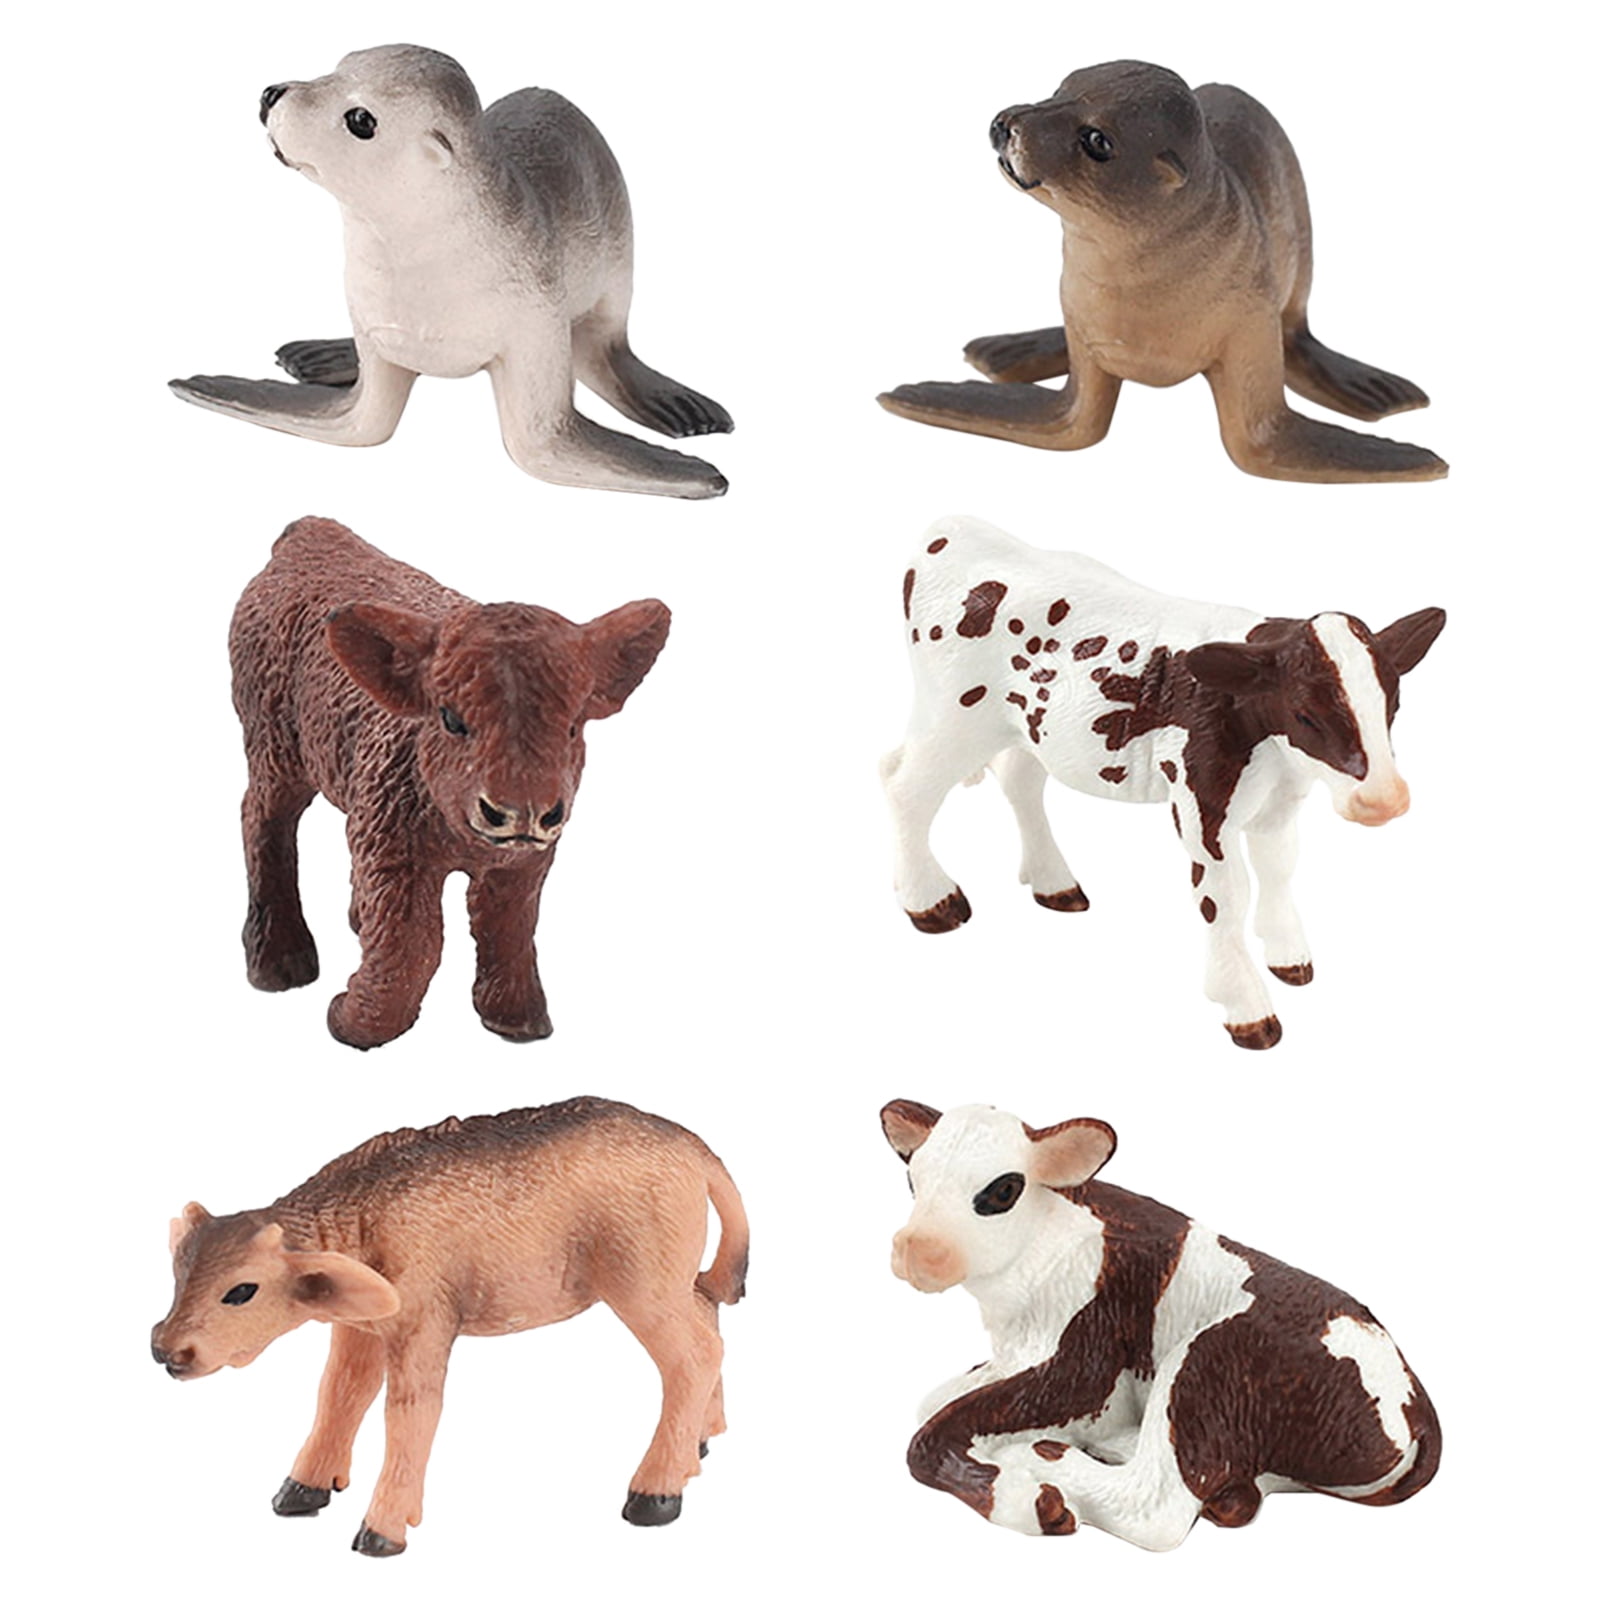 Details about   Zoo Animals,Mini Safari Statue Realistic Plastic Forest Jungle Toy,Educational 